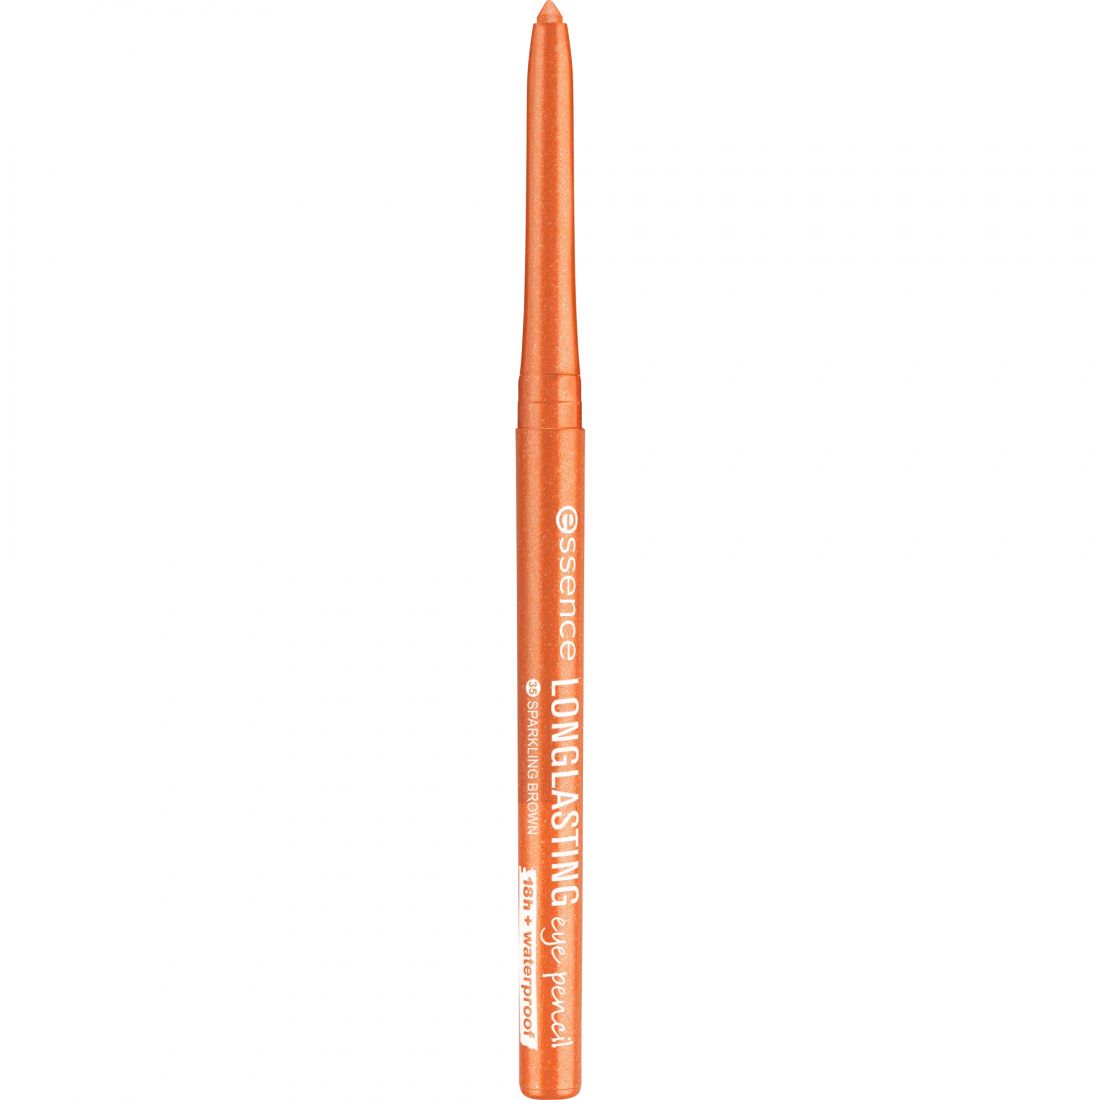 Essence - Crayon Yeux Waterproof 'Long-Lasting 18h' - 39 Shimmer Sunsation 0.28 g